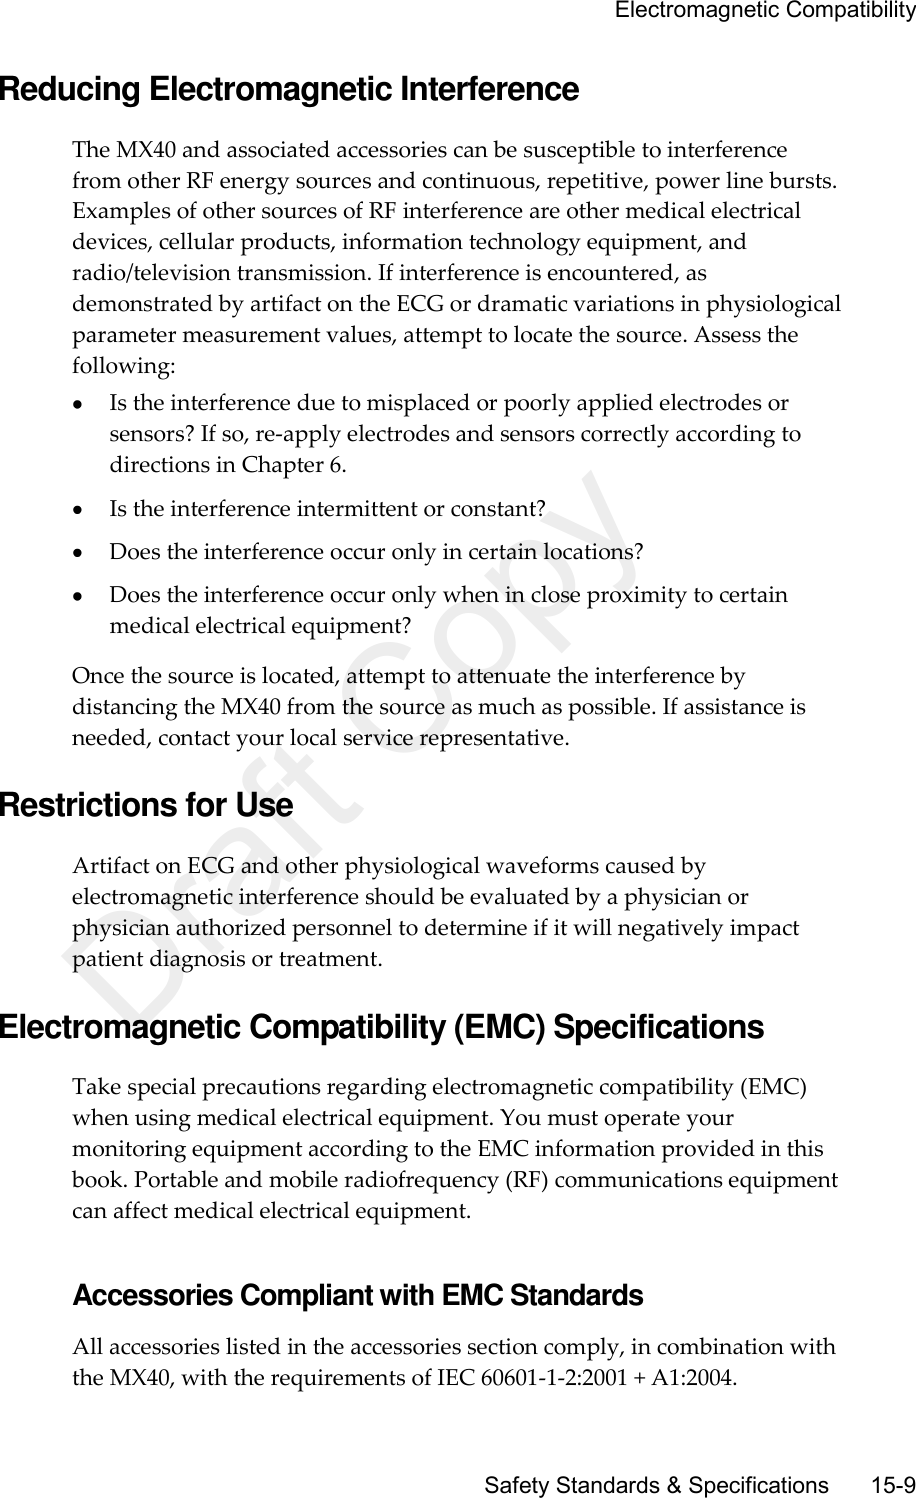     Electromagnetic Compatibility       Safety Standards &amp; Specifications     15-9 Reducing Electromagnetic Interference The MX40 and associated accessories can be susceptible to interference from other RF energy sources and continuous, repetitive, power line bursts. Examples of other sources of RF interference are other medical electrical devices, cellular products, information technology equipment, and radio/television transmission. If interference is encountered, as demonstrated by artifact on the ECG or dramatic variations in physiological parameter measurement values, attempt to locate the source. Assess the following:  Is the interference due to misplaced or poorly applied electrodes or sensors? If so, re-apply electrodes and sensors correctly according to directions in Chapter 6.  Is the interference intermittent or constant?  Does the interference occur only in certain locations?  Does the interference occur only when in close proximity to certain medical electrical equipment? Once the source is located, attempt to attenuate the interference by distancing the MX40 from the source as much as possible. If assistance is needed, contact your local service representative.  Restrictions for Use Artifact on ECG and other physiological waveforms caused by electromagnetic interference should be evaluated by a physician or physician authorized personnel to determine if it will negatively impact patient diagnosis or treatment.  Electromagnetic Compatibility (EMC) Specifications Take special precautions regarding electromagnetic compatibility (EMC) when using medical electrical equipment. You must operate your monitoring equipment according to the EMC information provided in this book. Portable and mobile radiofrequency (RF) communications equipment can affect medical electrical equipment.  Accessories Compliant with EMC Standards All accessories listed in the accessories section comply, in combination with the MX40, with the requirements of IEC 60601-1-2:2001 + A1:2004. Draft Copy